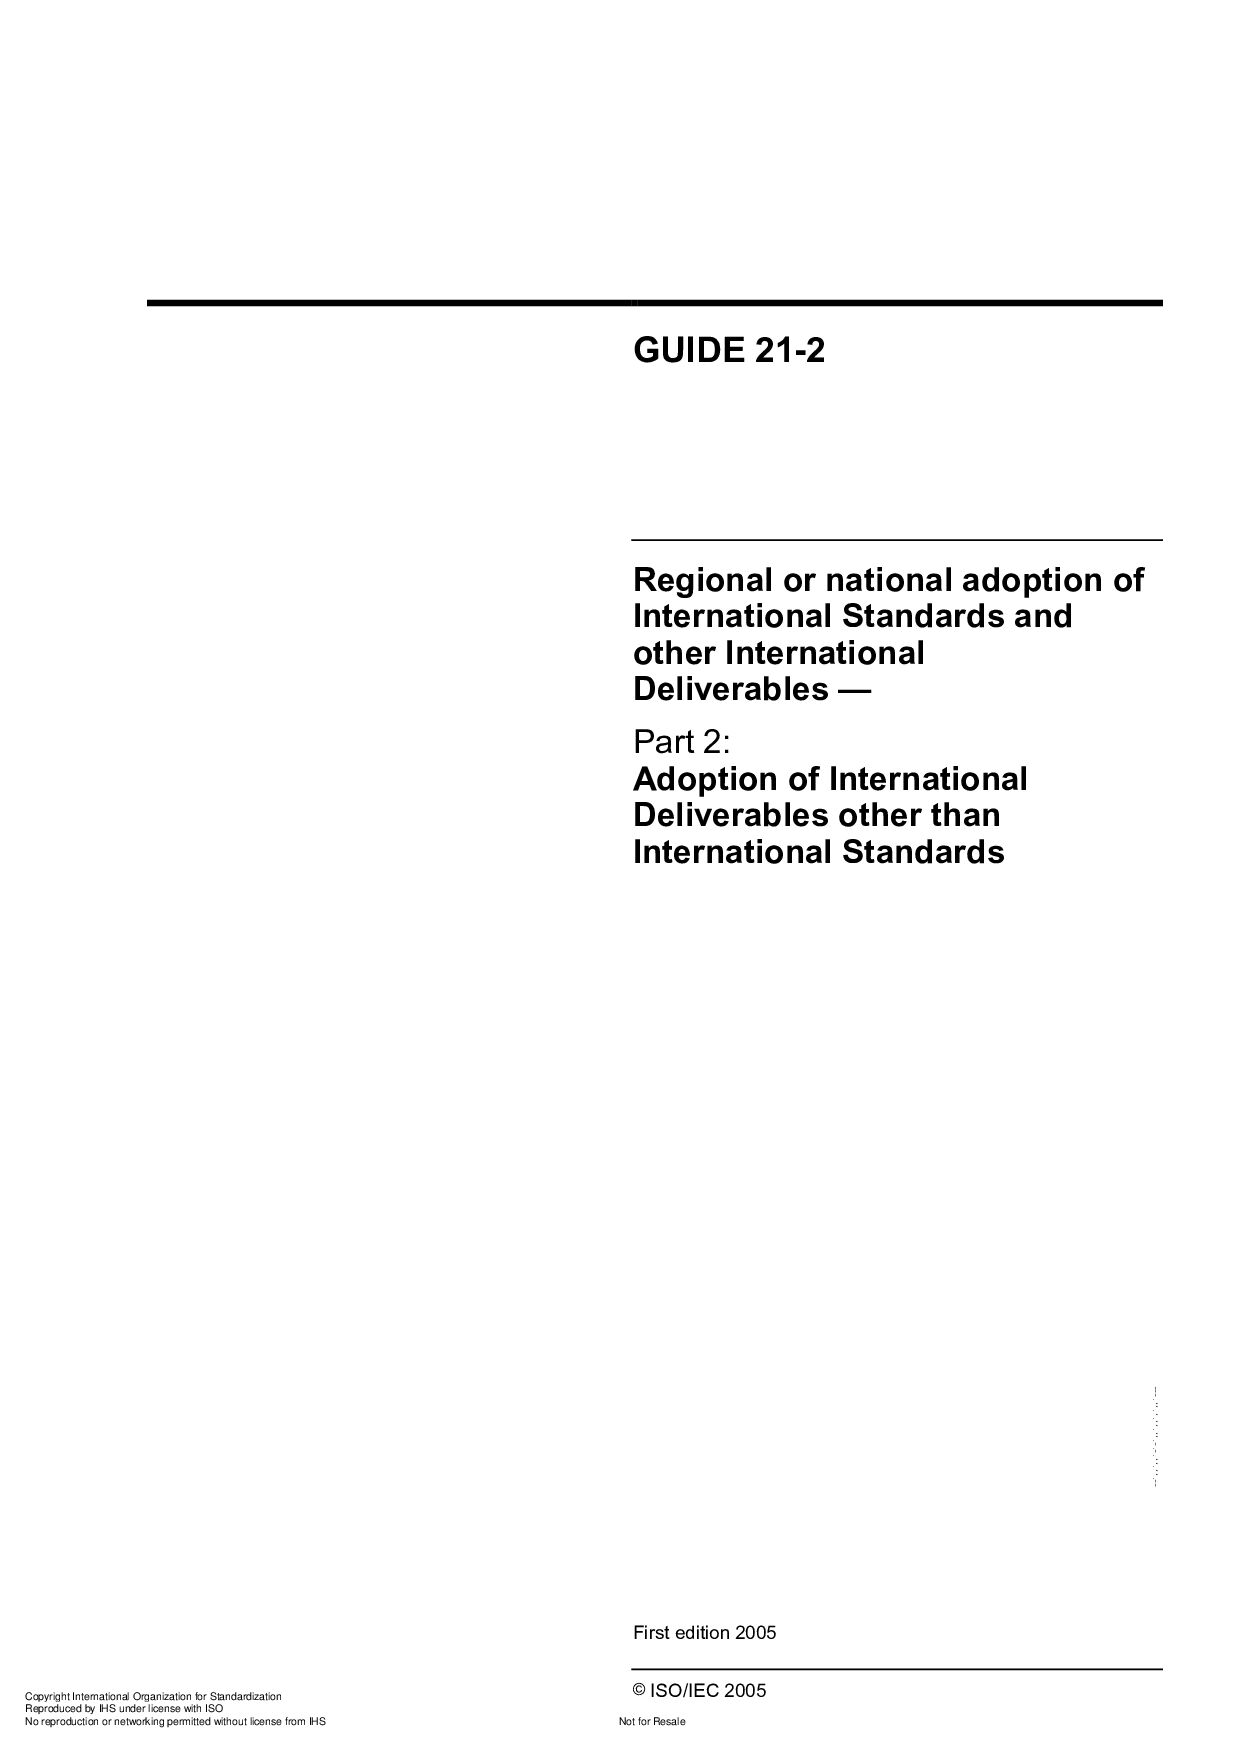 ISO/IEC Guide 21-2:2005封面图